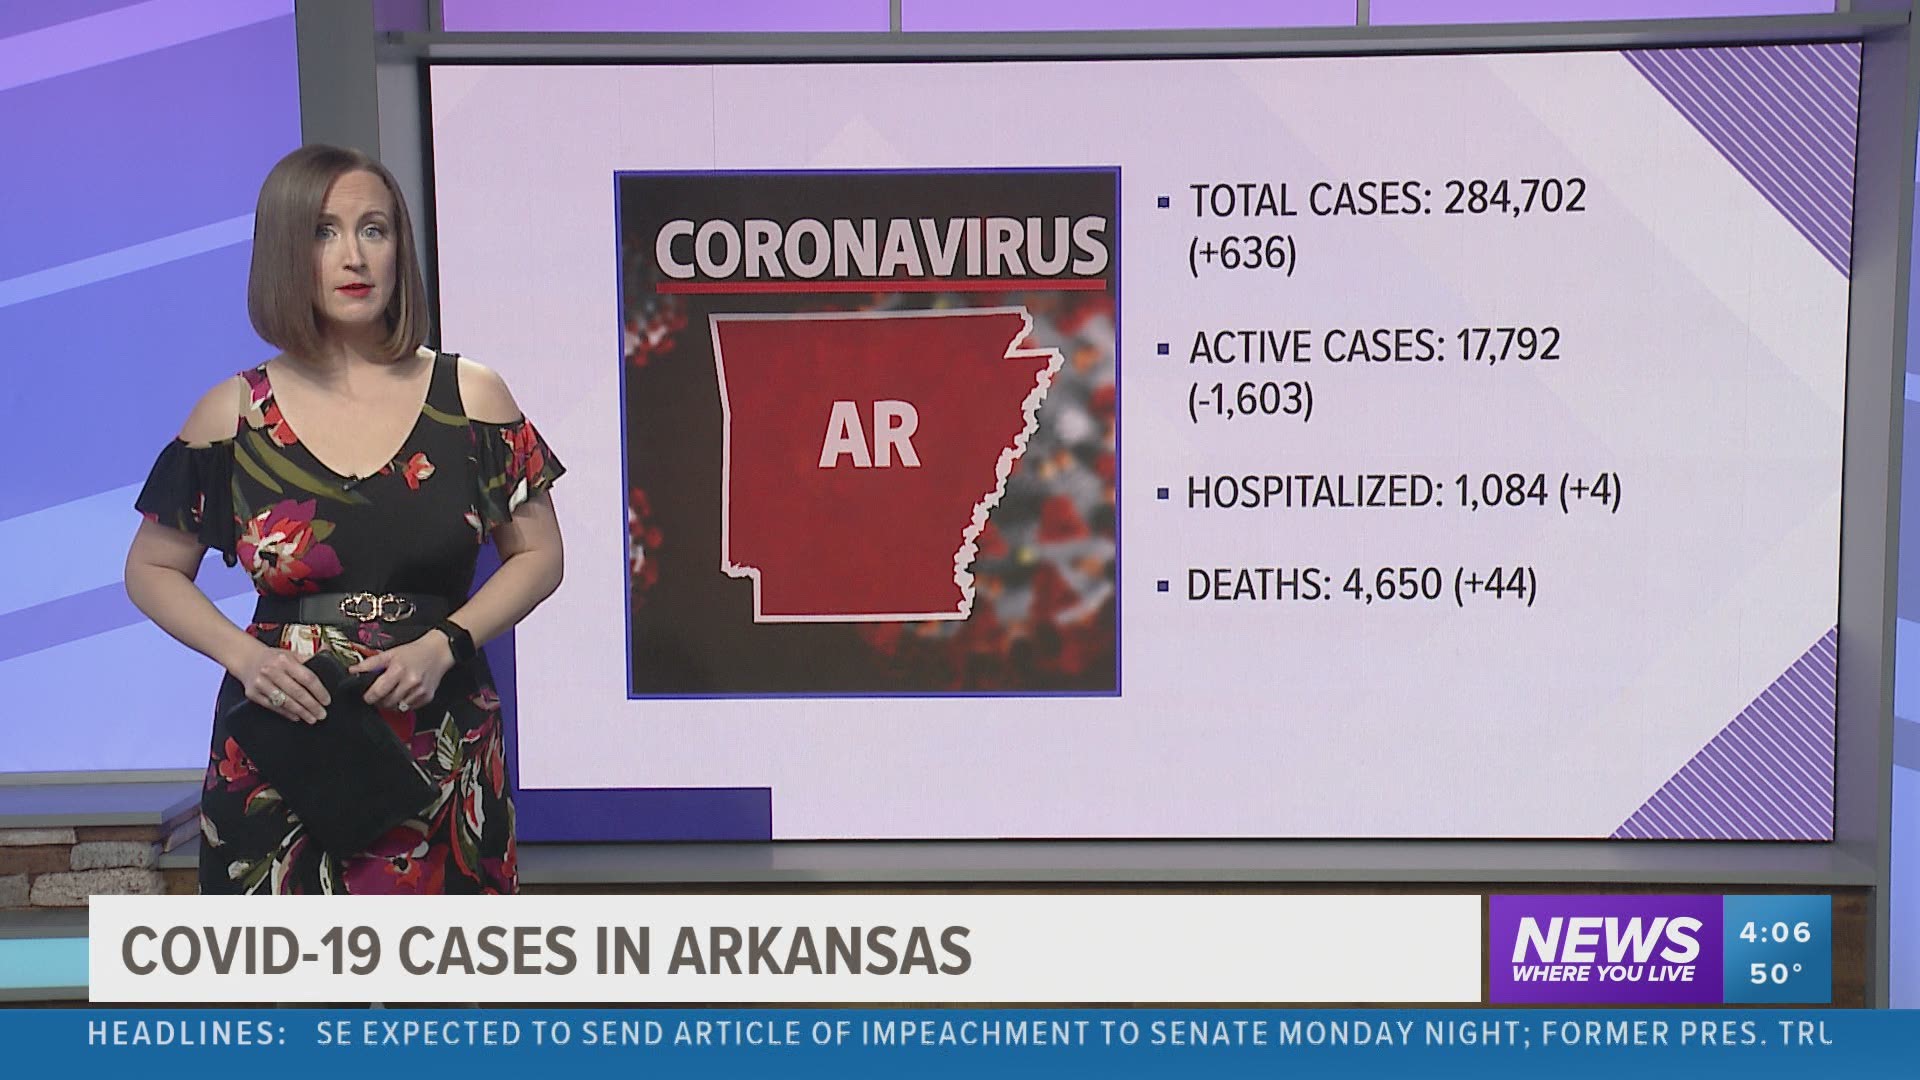 A look at the latest case numbers for the coronavirus in Arkansas on Monday, January 25 https://bit.ly/2Uygy5V